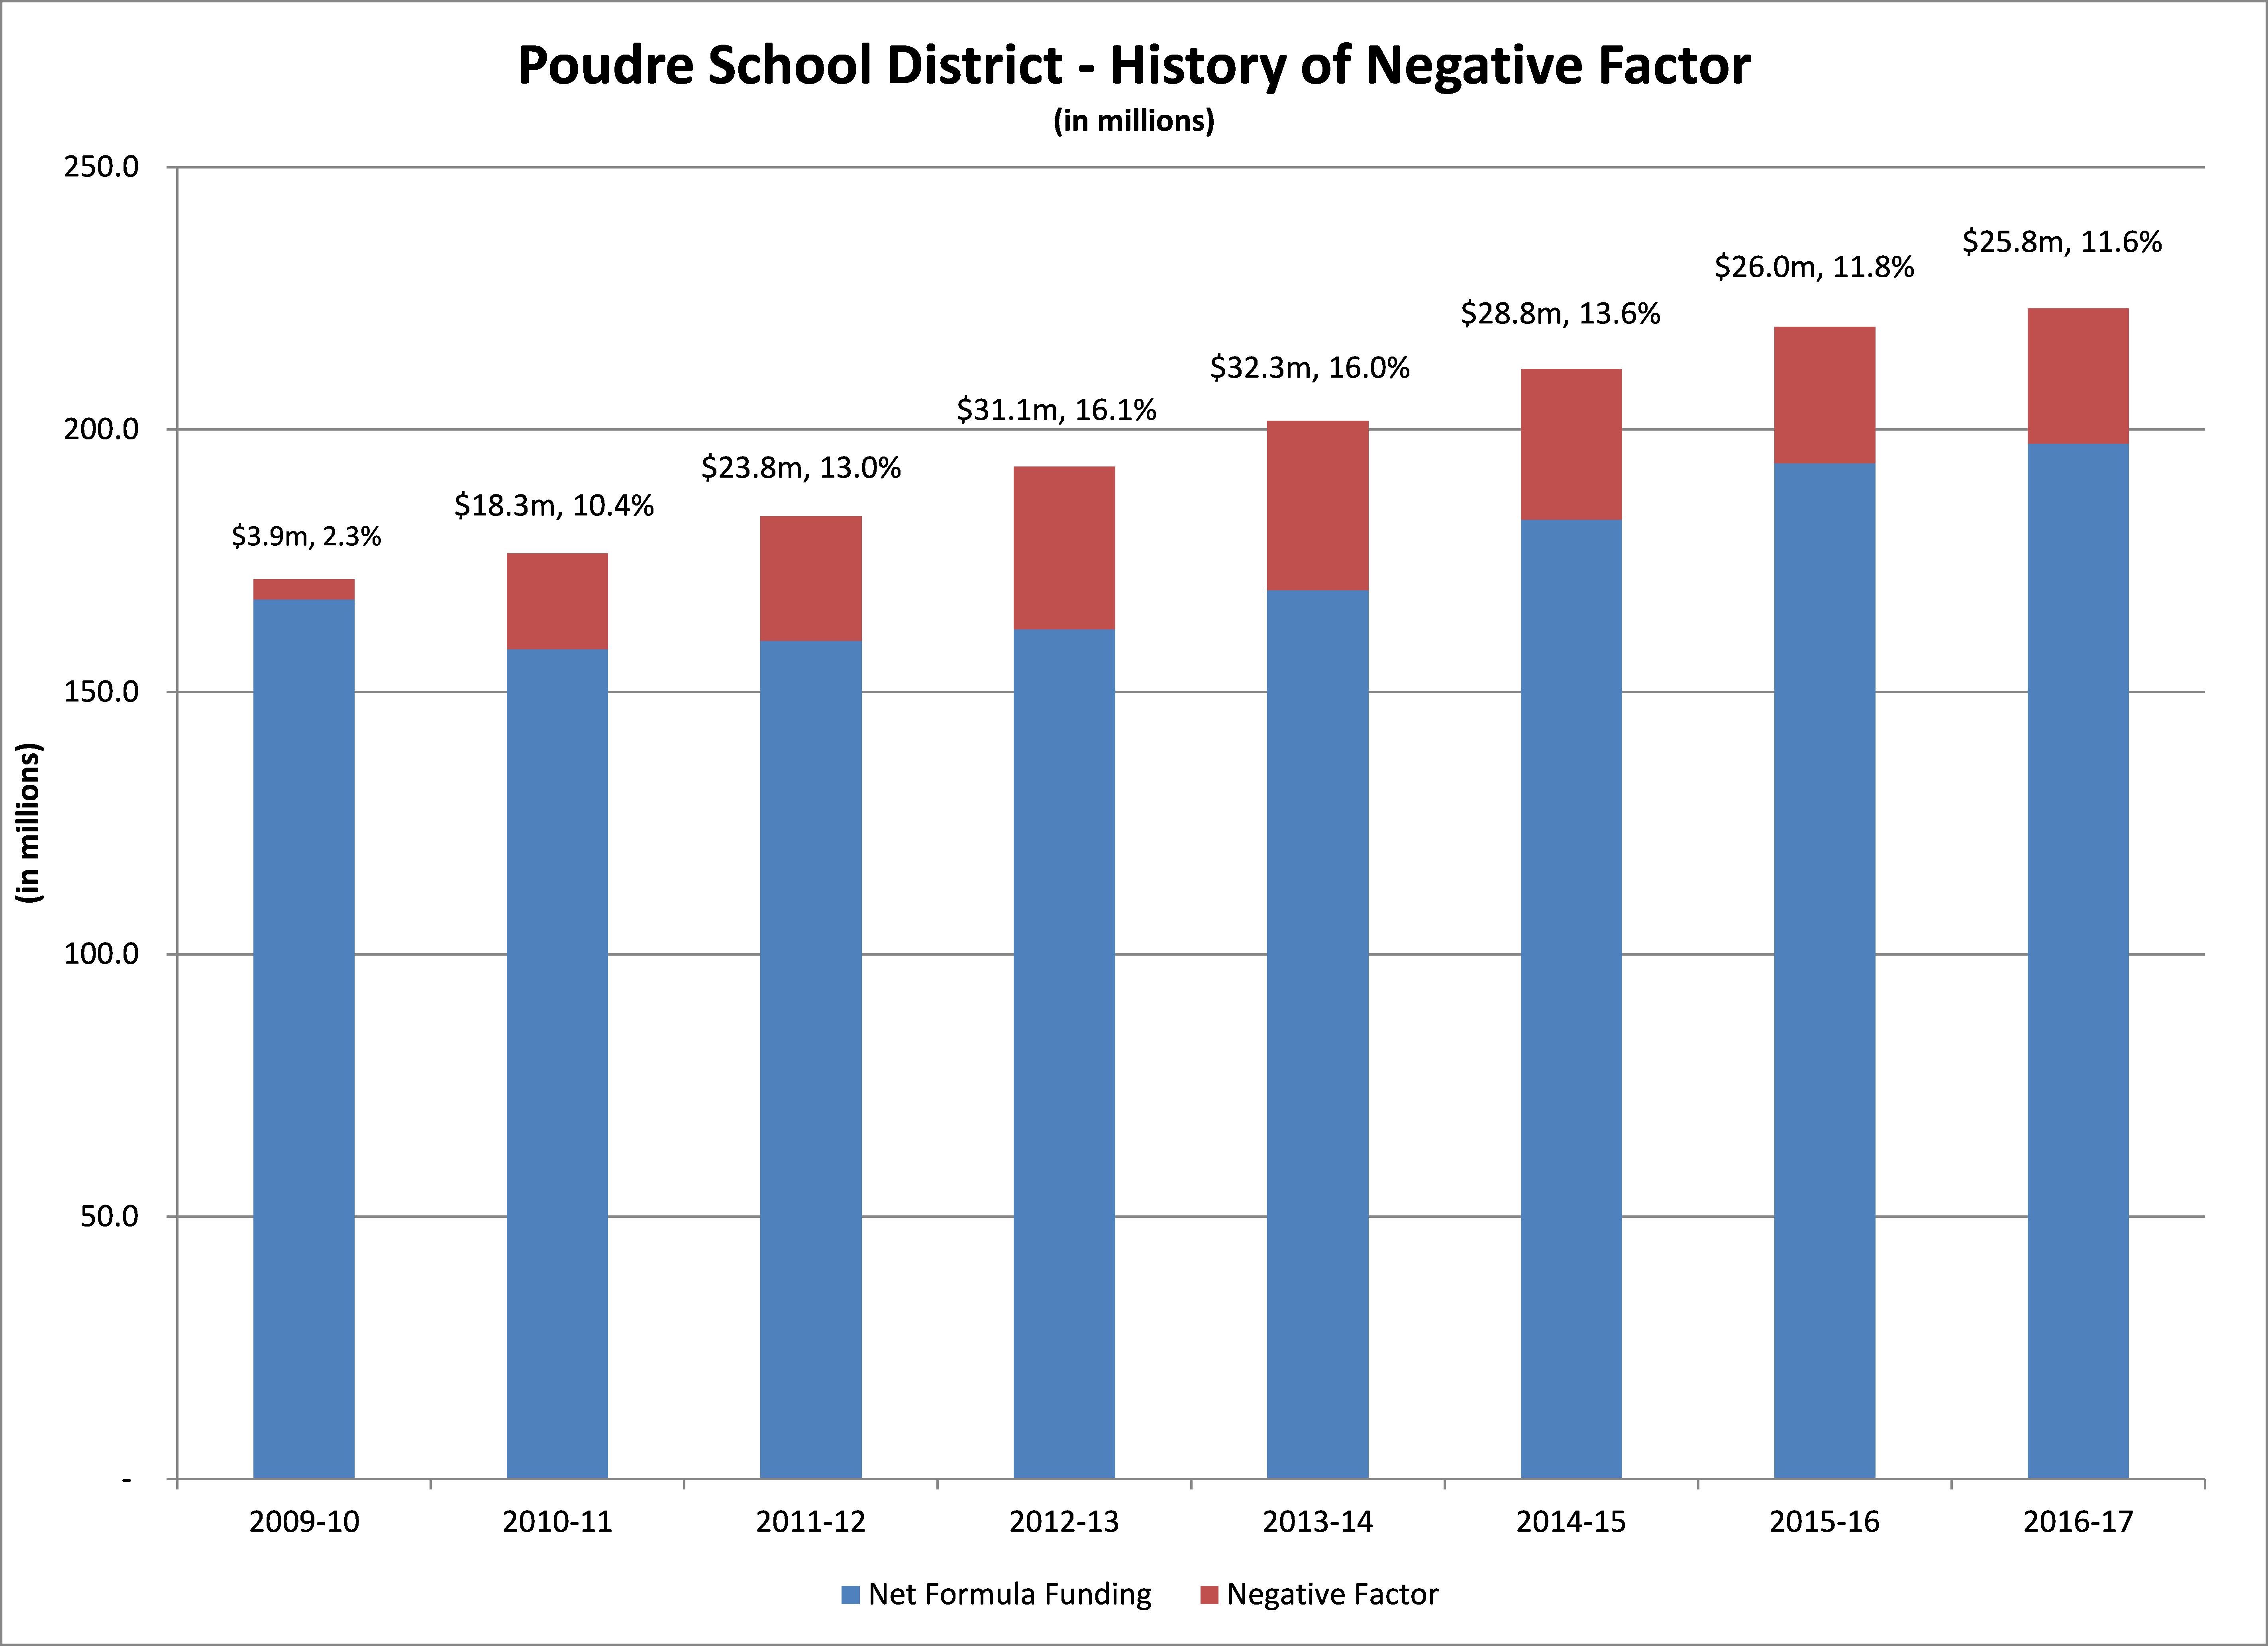 Bar chart showing increase of negative factor over time